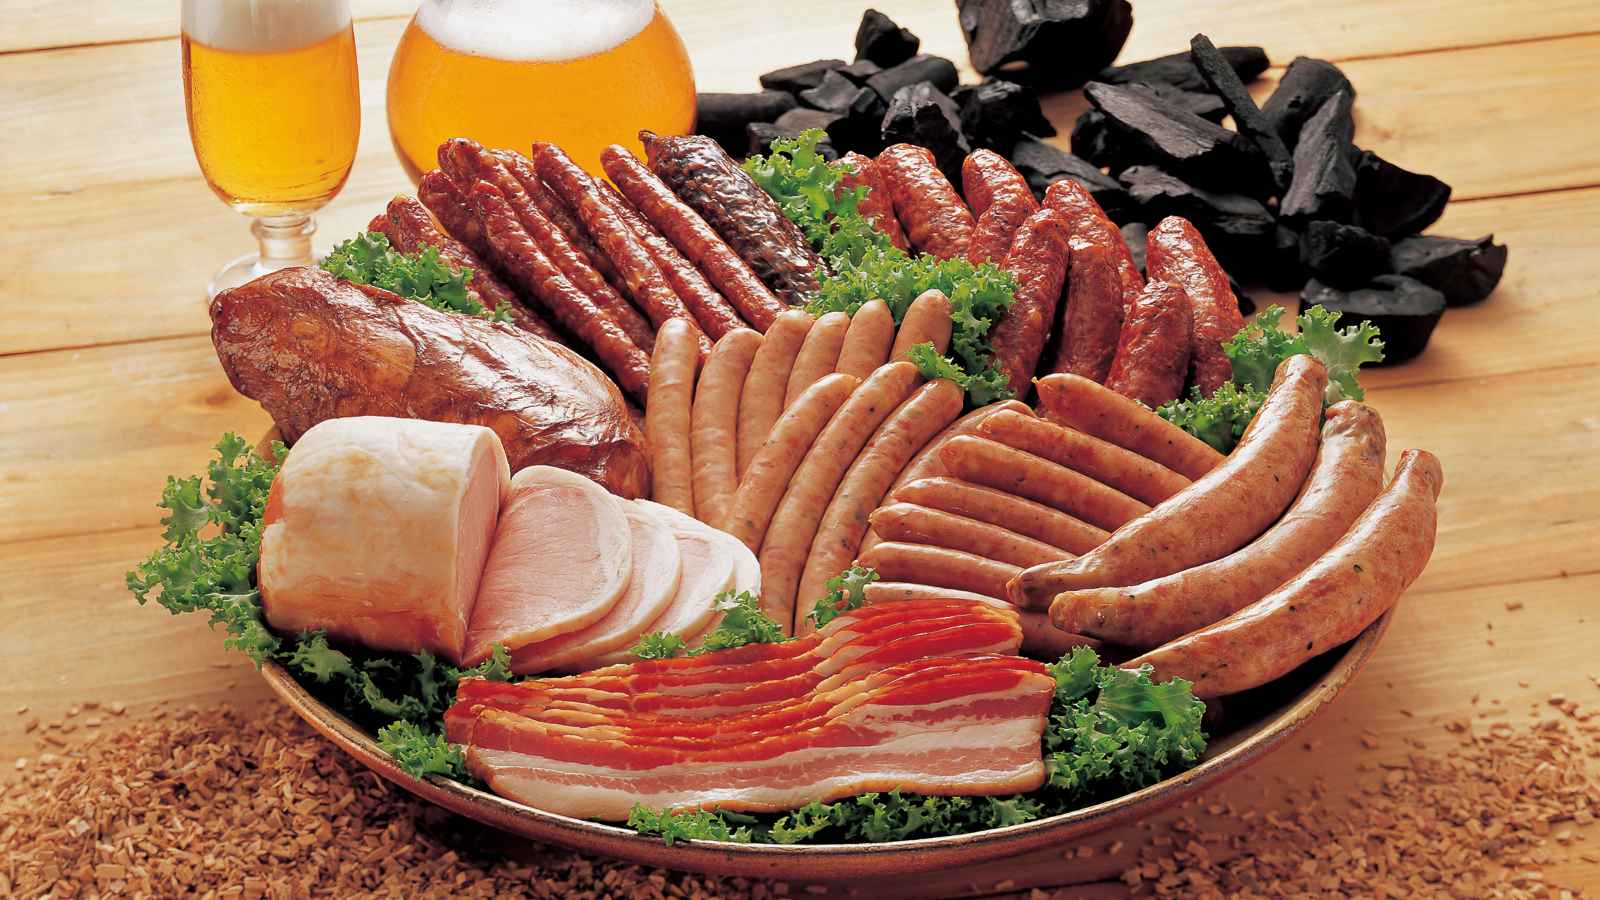 <p>According to the World Health Organization, processed meats such as ham, bacon, salami, and frankfurters are classified as Group One carcinogens. Consuming them is strongly linked to an increased risk of bowel and stomach cancer.</p>